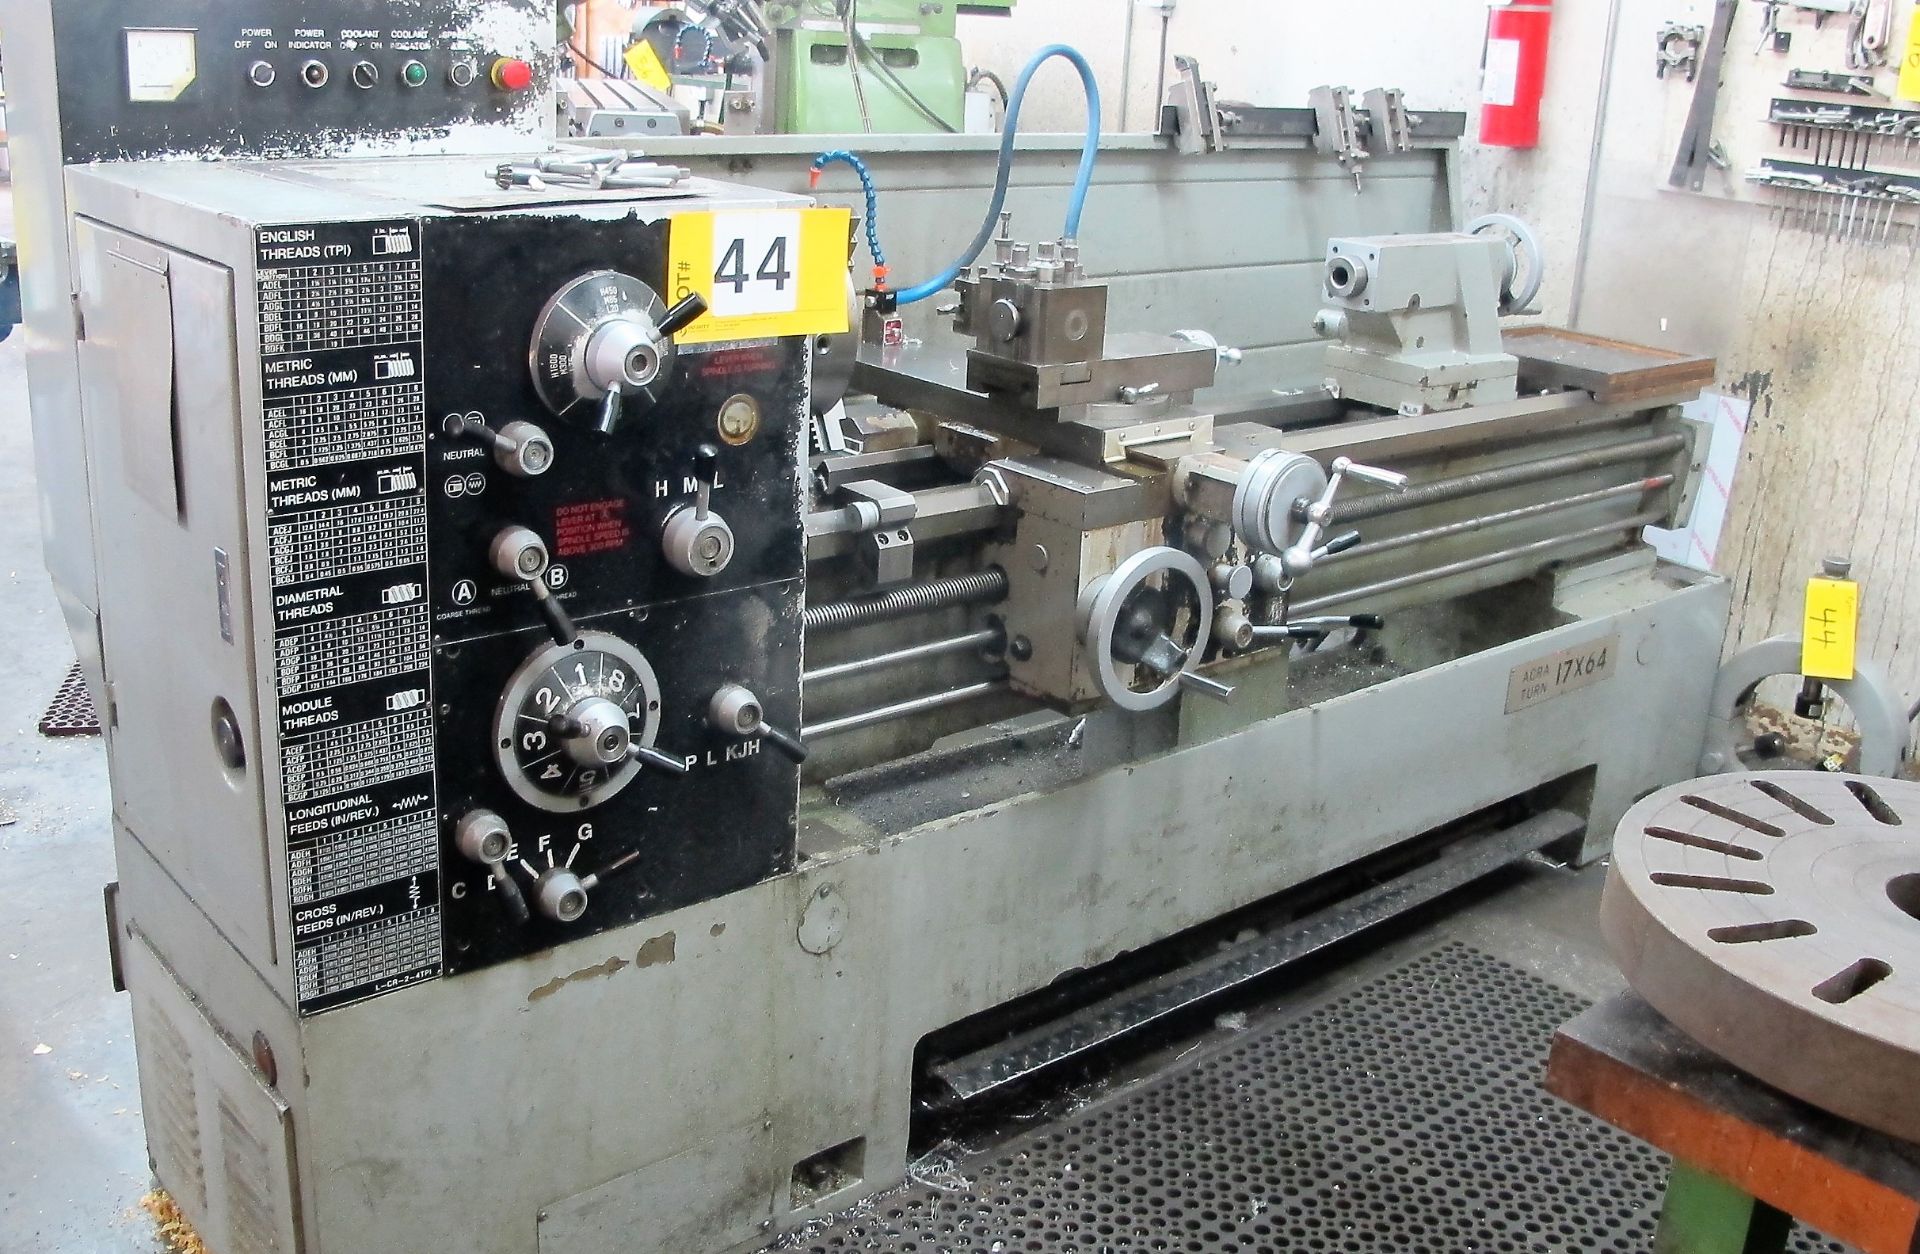 ACRA TURN 1764T, 3 PHASE LATHE W/64" X 17" BED, 10" 3 JAW CHUCK, 18" SWING X 64" BETWEEN CENTERS,